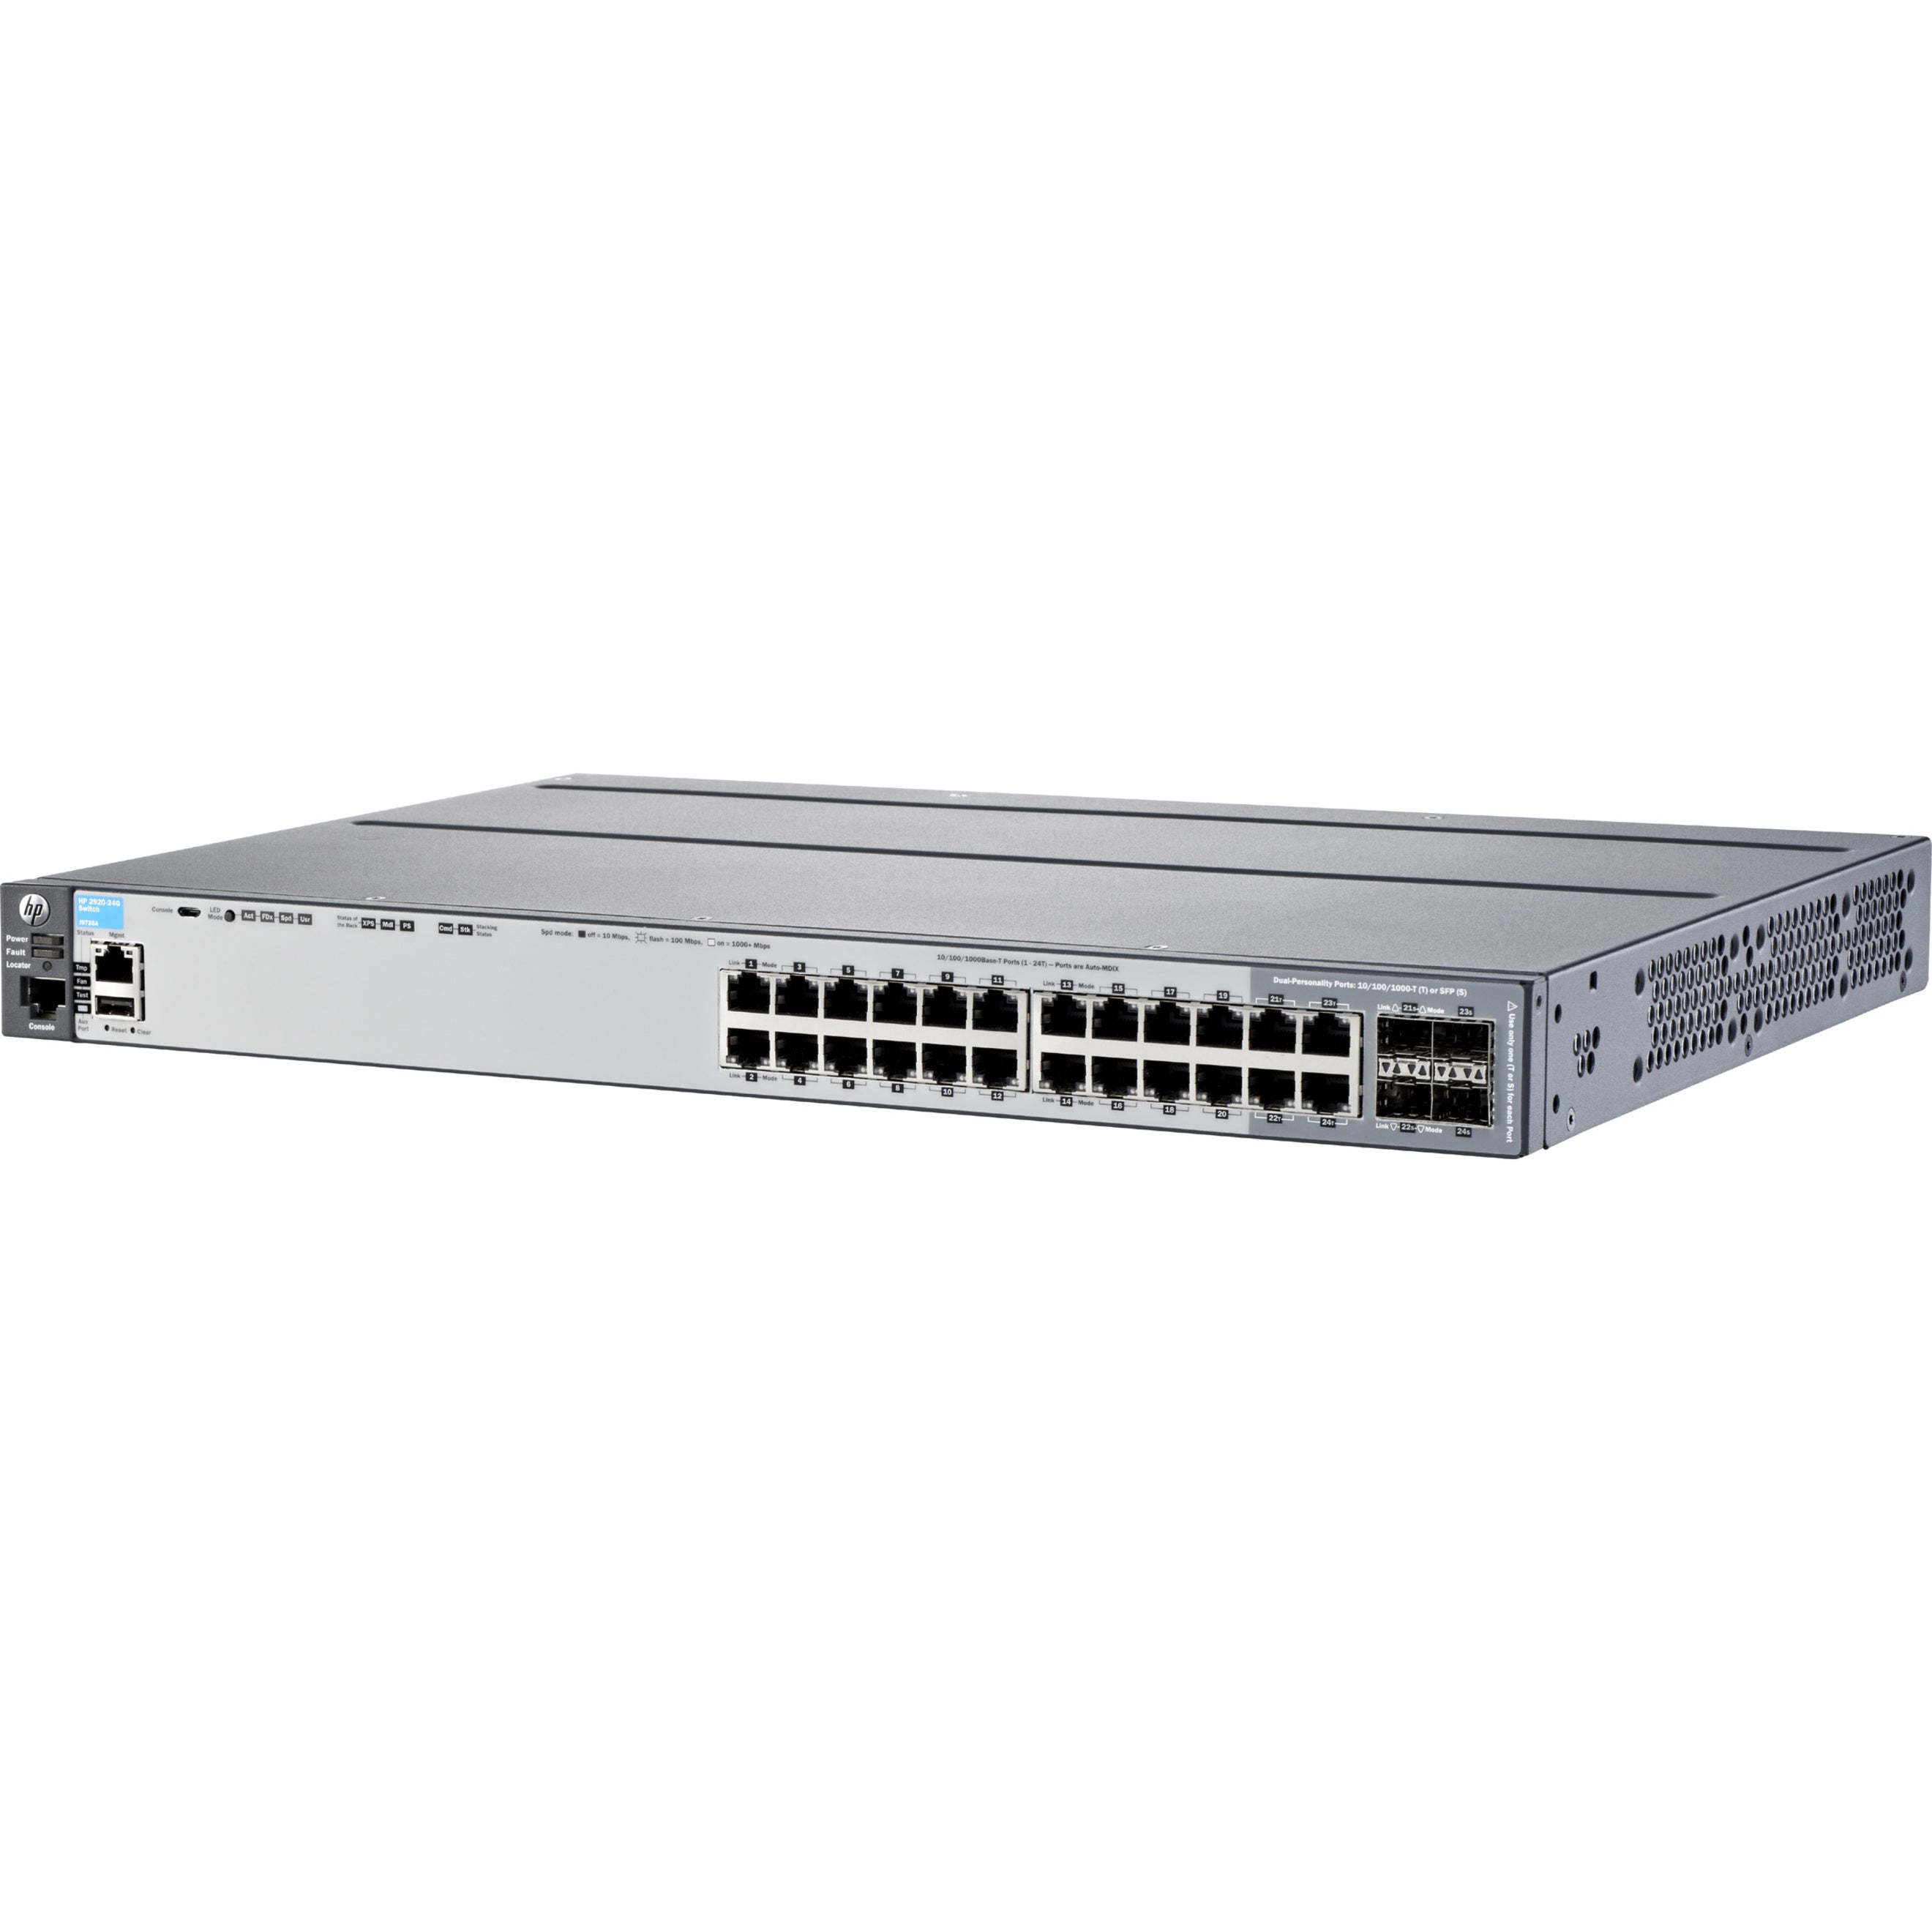 HPE Sourcing 2920-24G Switch (J9726A)